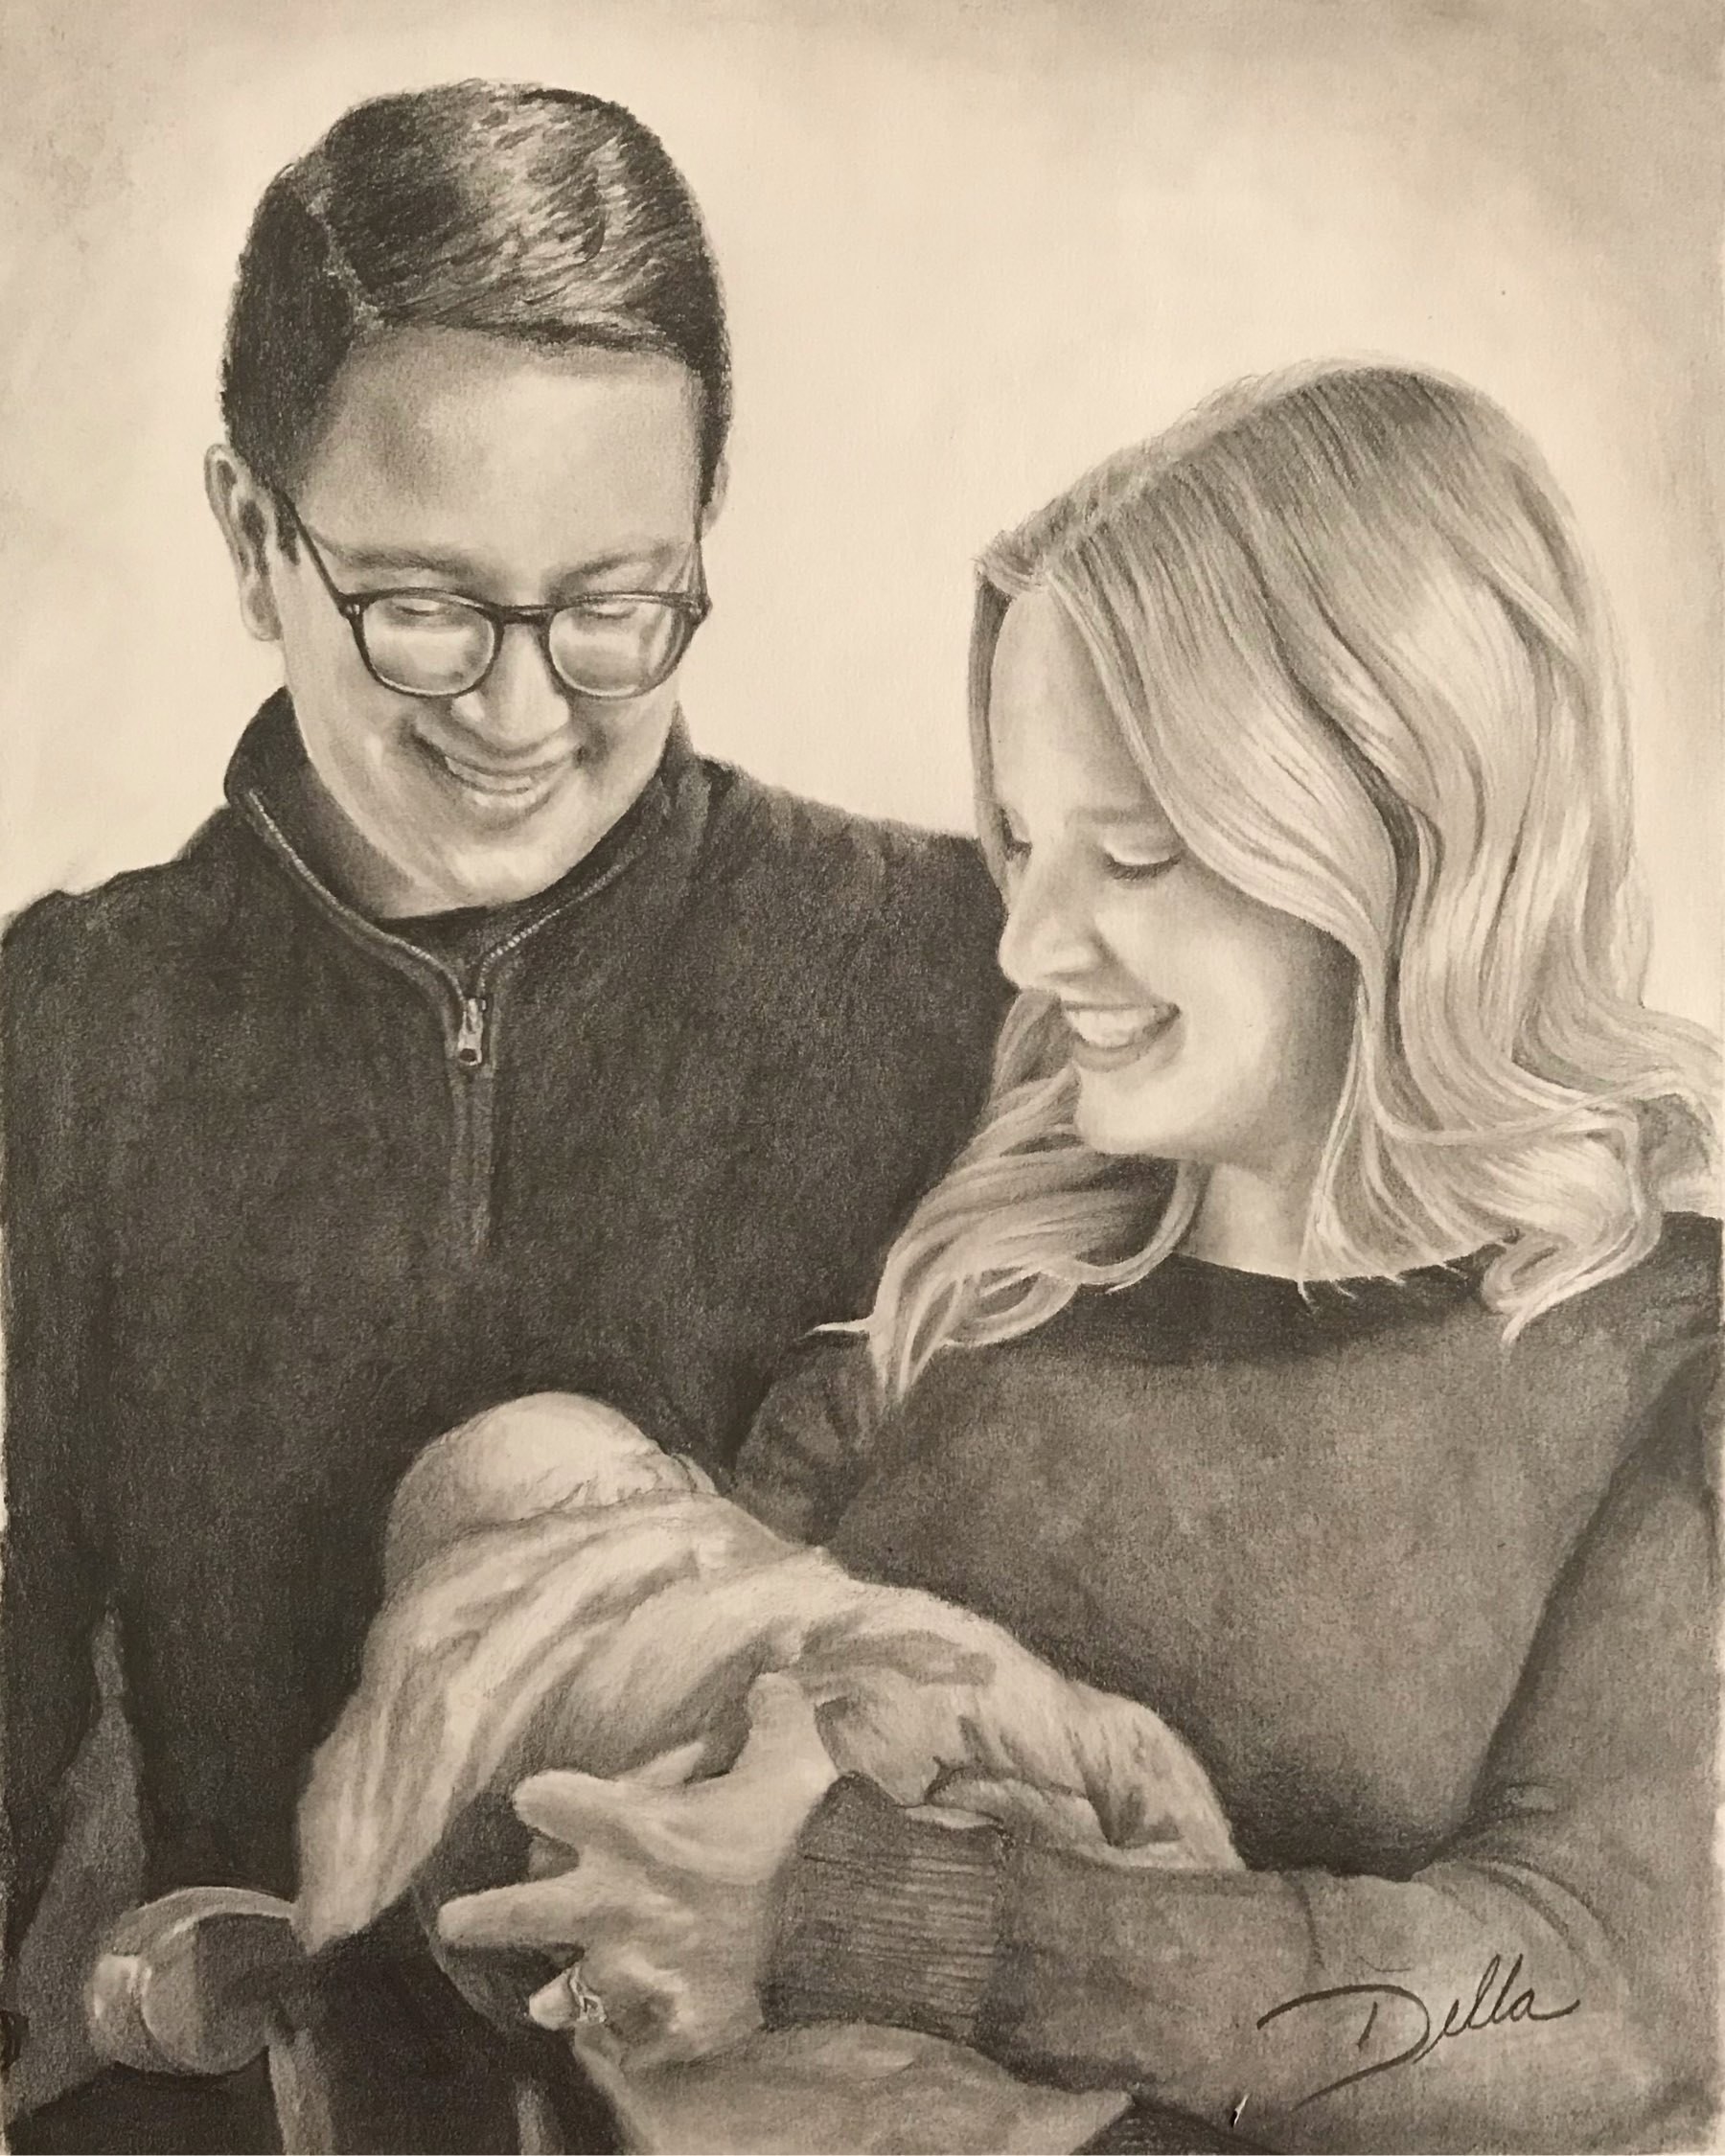 Drawing of couple with newborn by Della Chelpka